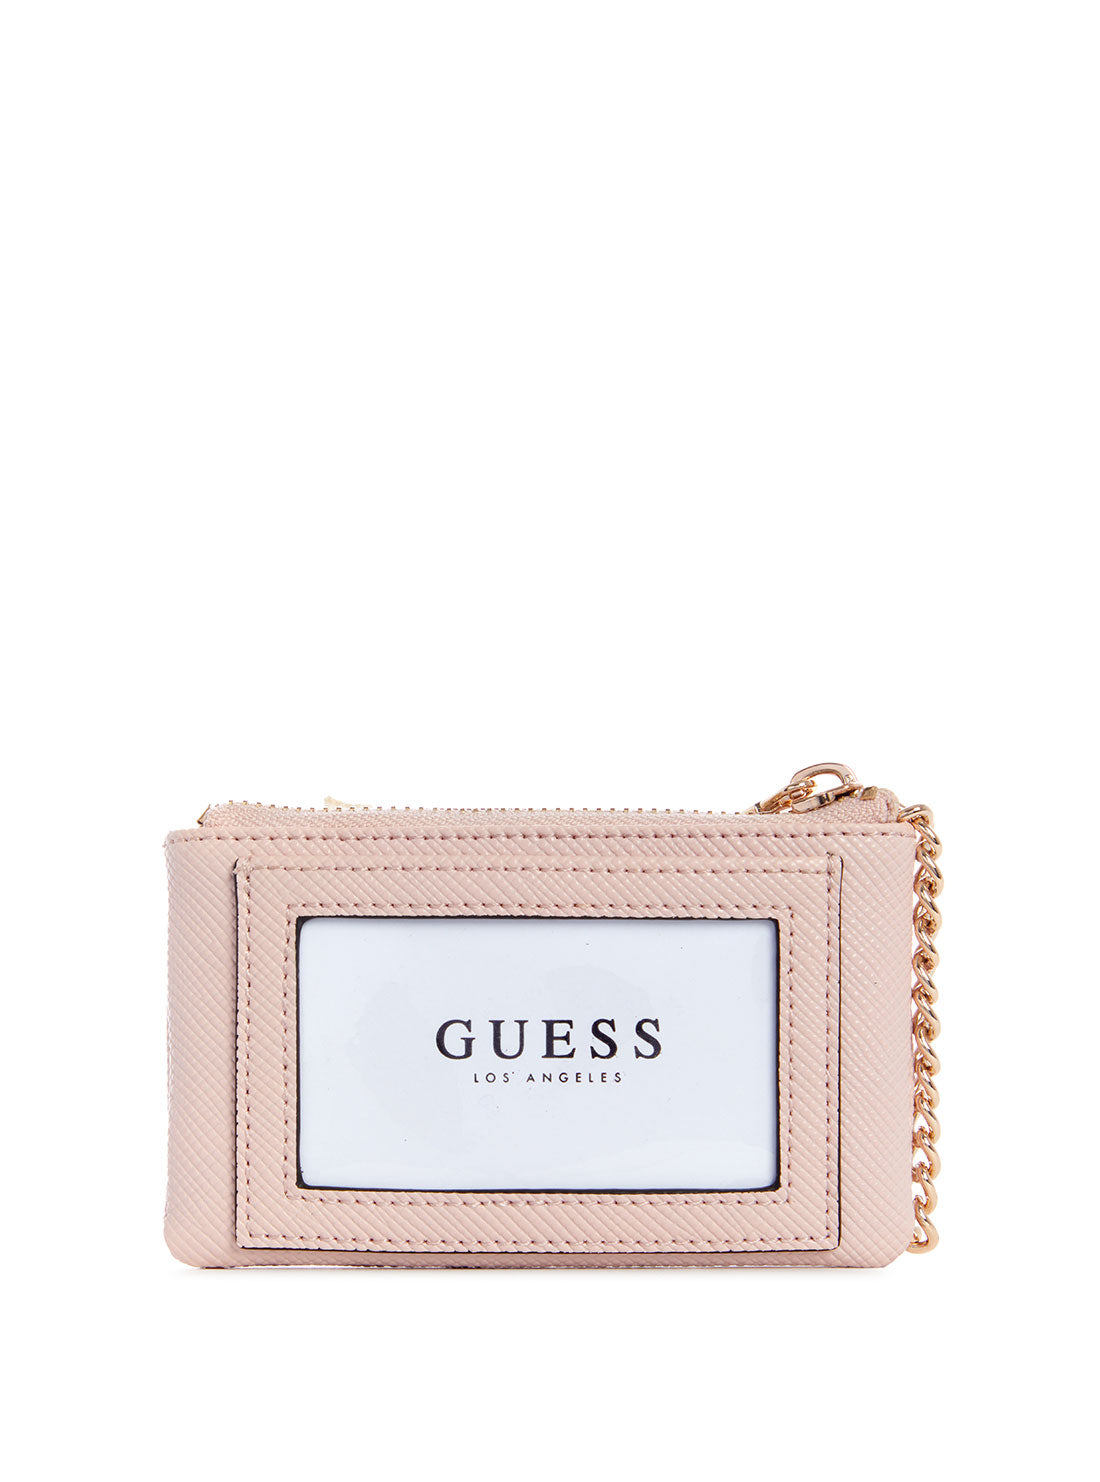 GUESS Pink Laurel Zip Pouch back view